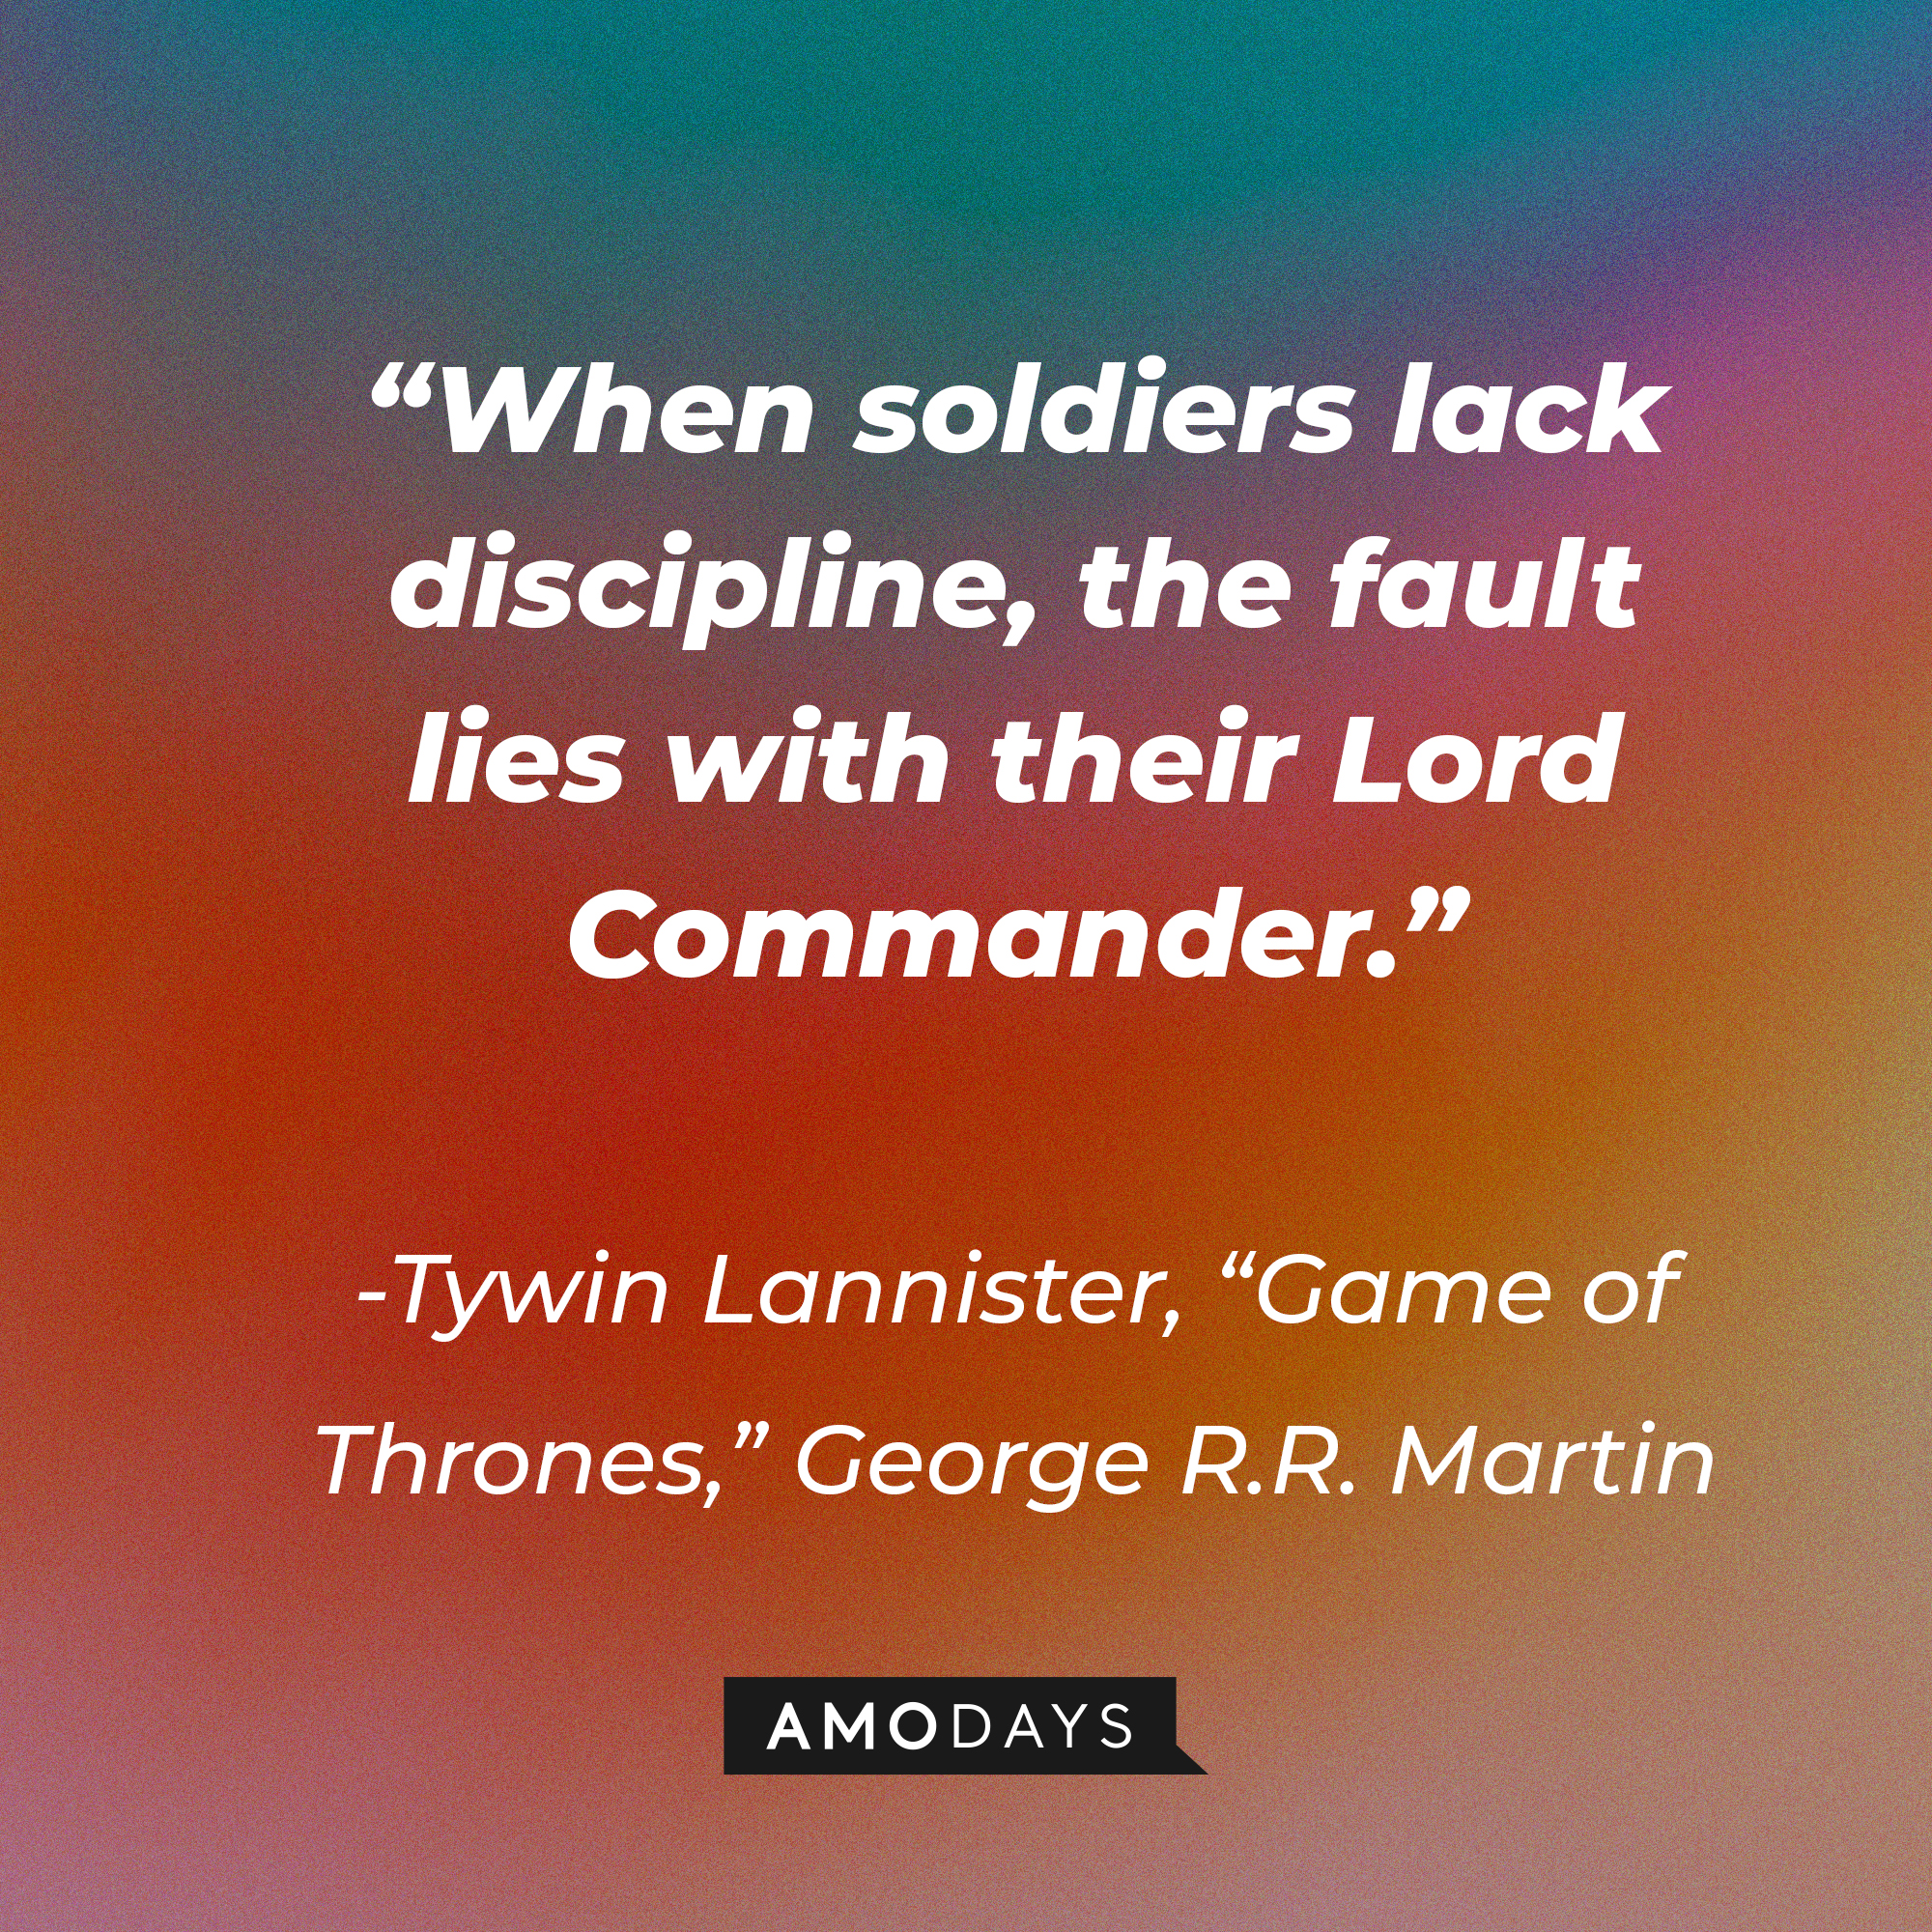 Tywin Lannister’s quote from George R.R. Martin's "Game of Thrones": “When soldiers lack discipline, the fault lies with their Lord Commander.” | Source: AmoDays